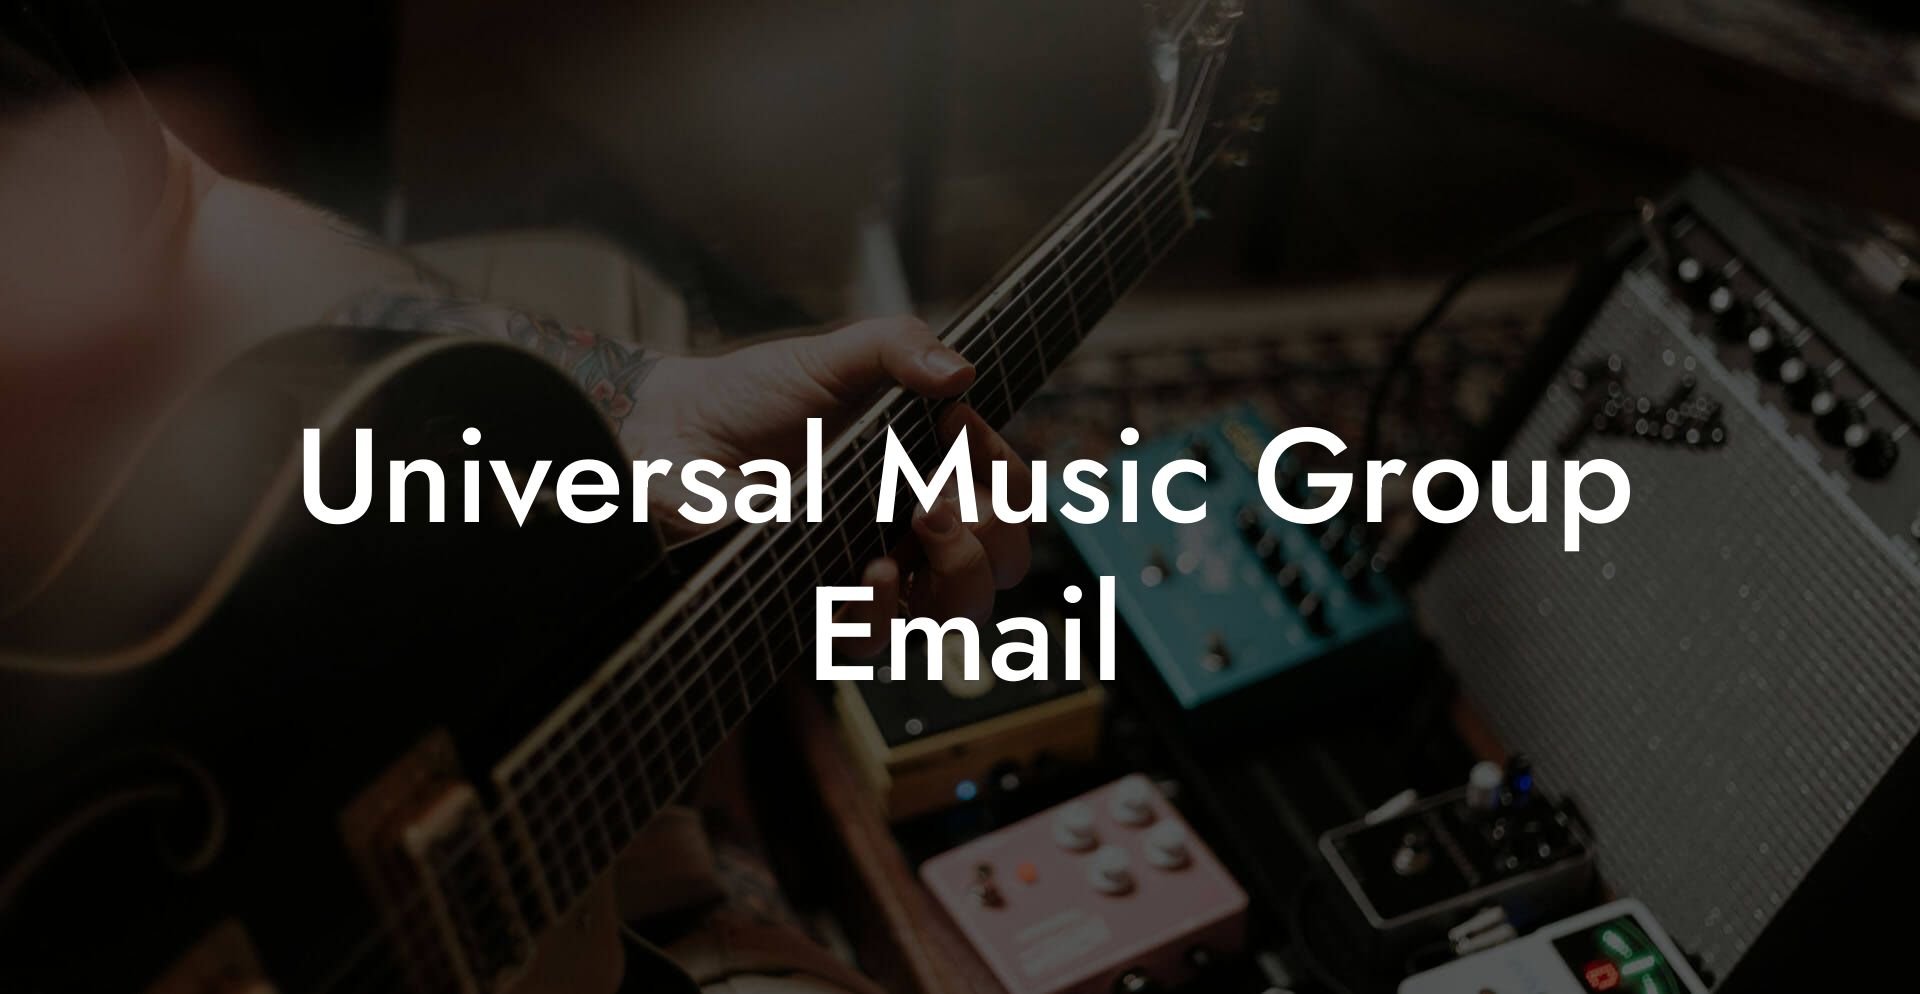 Universal Music Group Email